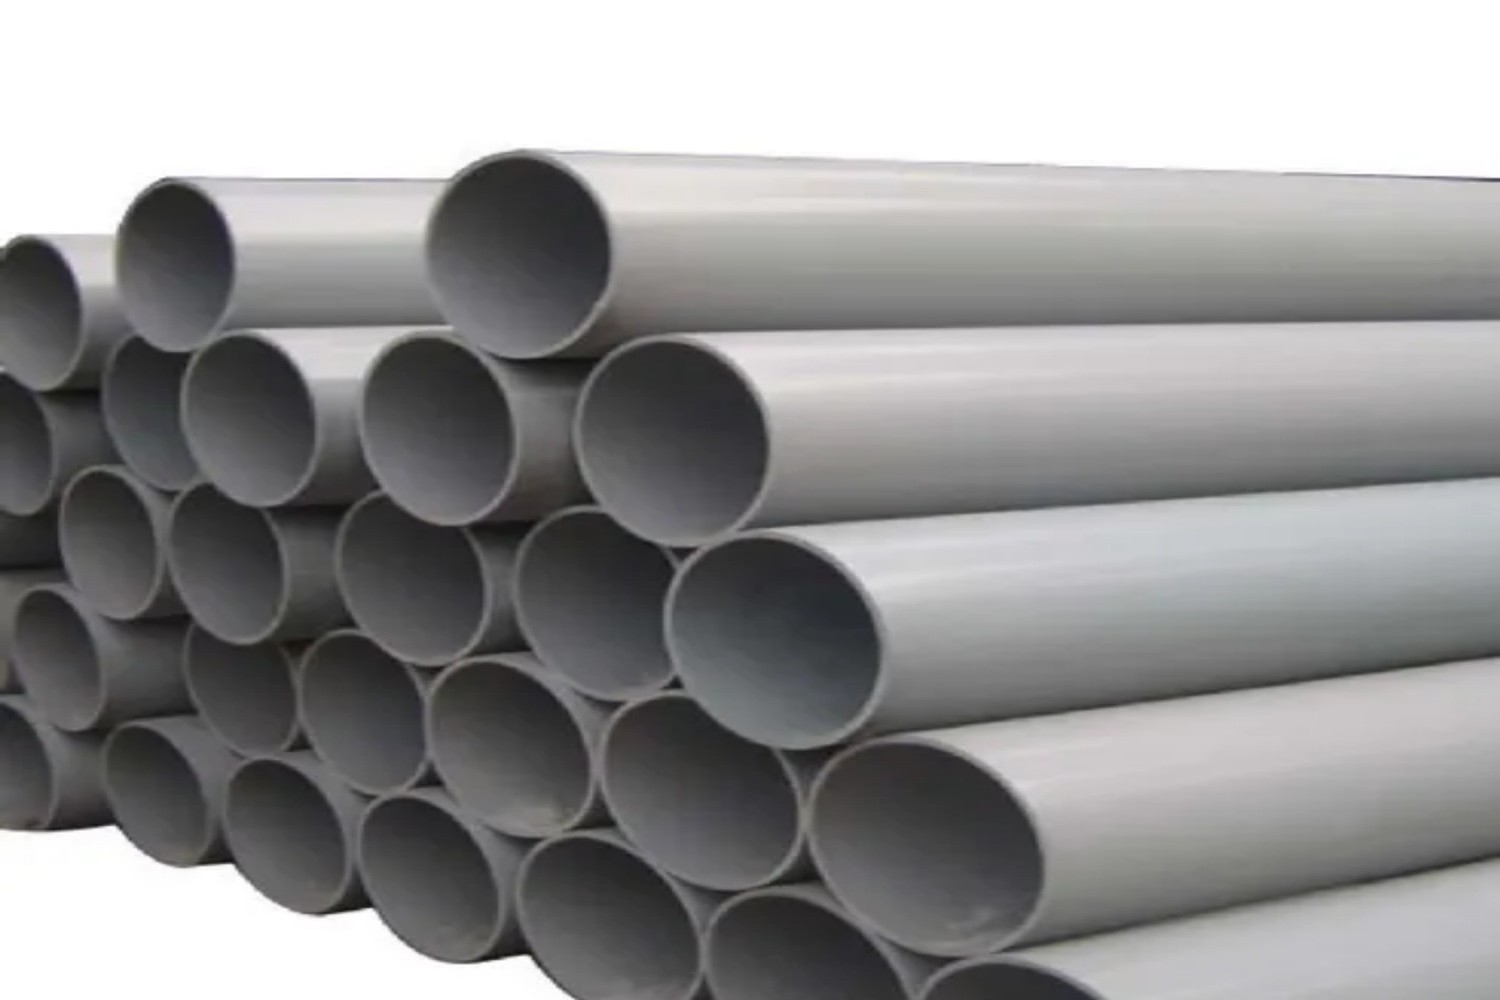 Buy Finolex 80 mm UPVC Pipes SCH 40 3 m Plain online at best rates in India